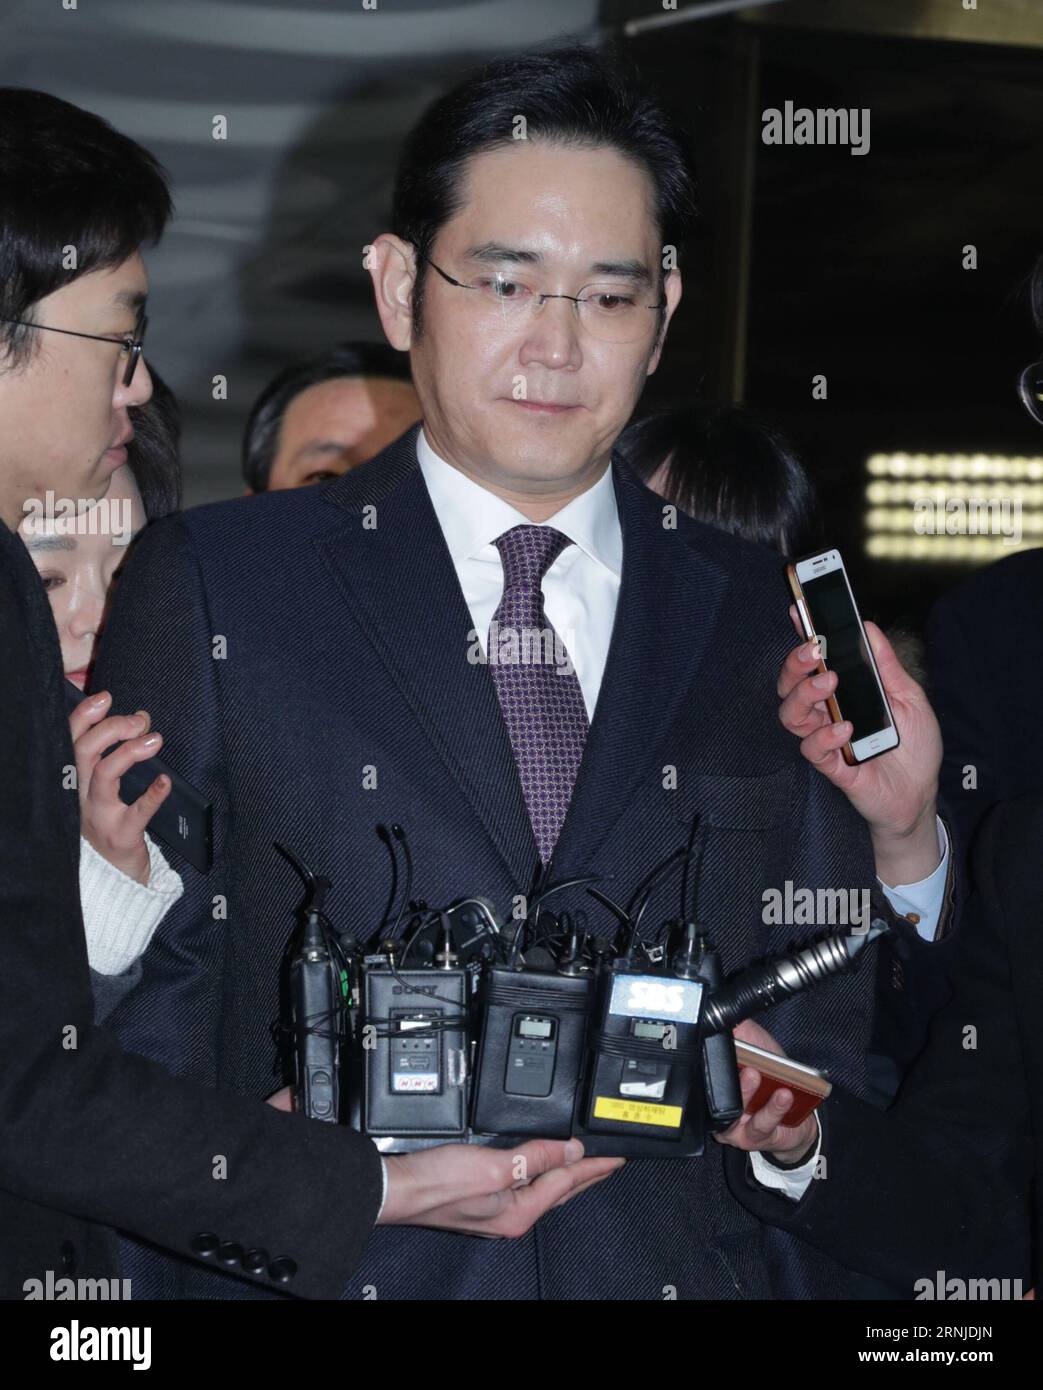 (170118) -- SEOUL, Jan. 18, 2017 -- Samsung Electronics Vice Chairman Lee Jae-yong receives interviews before a court hearing in Seoul, South Korea, Jan. 18, 2017. Samsung Electronics Vice Chairman Lee Jae-yong appeared in court on Wednesday for determination on his arrest warrant which prosecutors sought two days earlier. )(zcc) SOUTH KOREA-SEOUL-LEE JAE-YONG-HEARING LeexSang-ho PUBLICATIONxNOTxINxCHN   Seoul Jan 18 2017 Samsung Electronics Vice Chairman Lee Jae Yong receives Interviews Before a Court Hearing in Seoul South Korea Jan 18 2017 Samsung Electronics Vice Chairman Lee Jae Yong appe Stock Photo